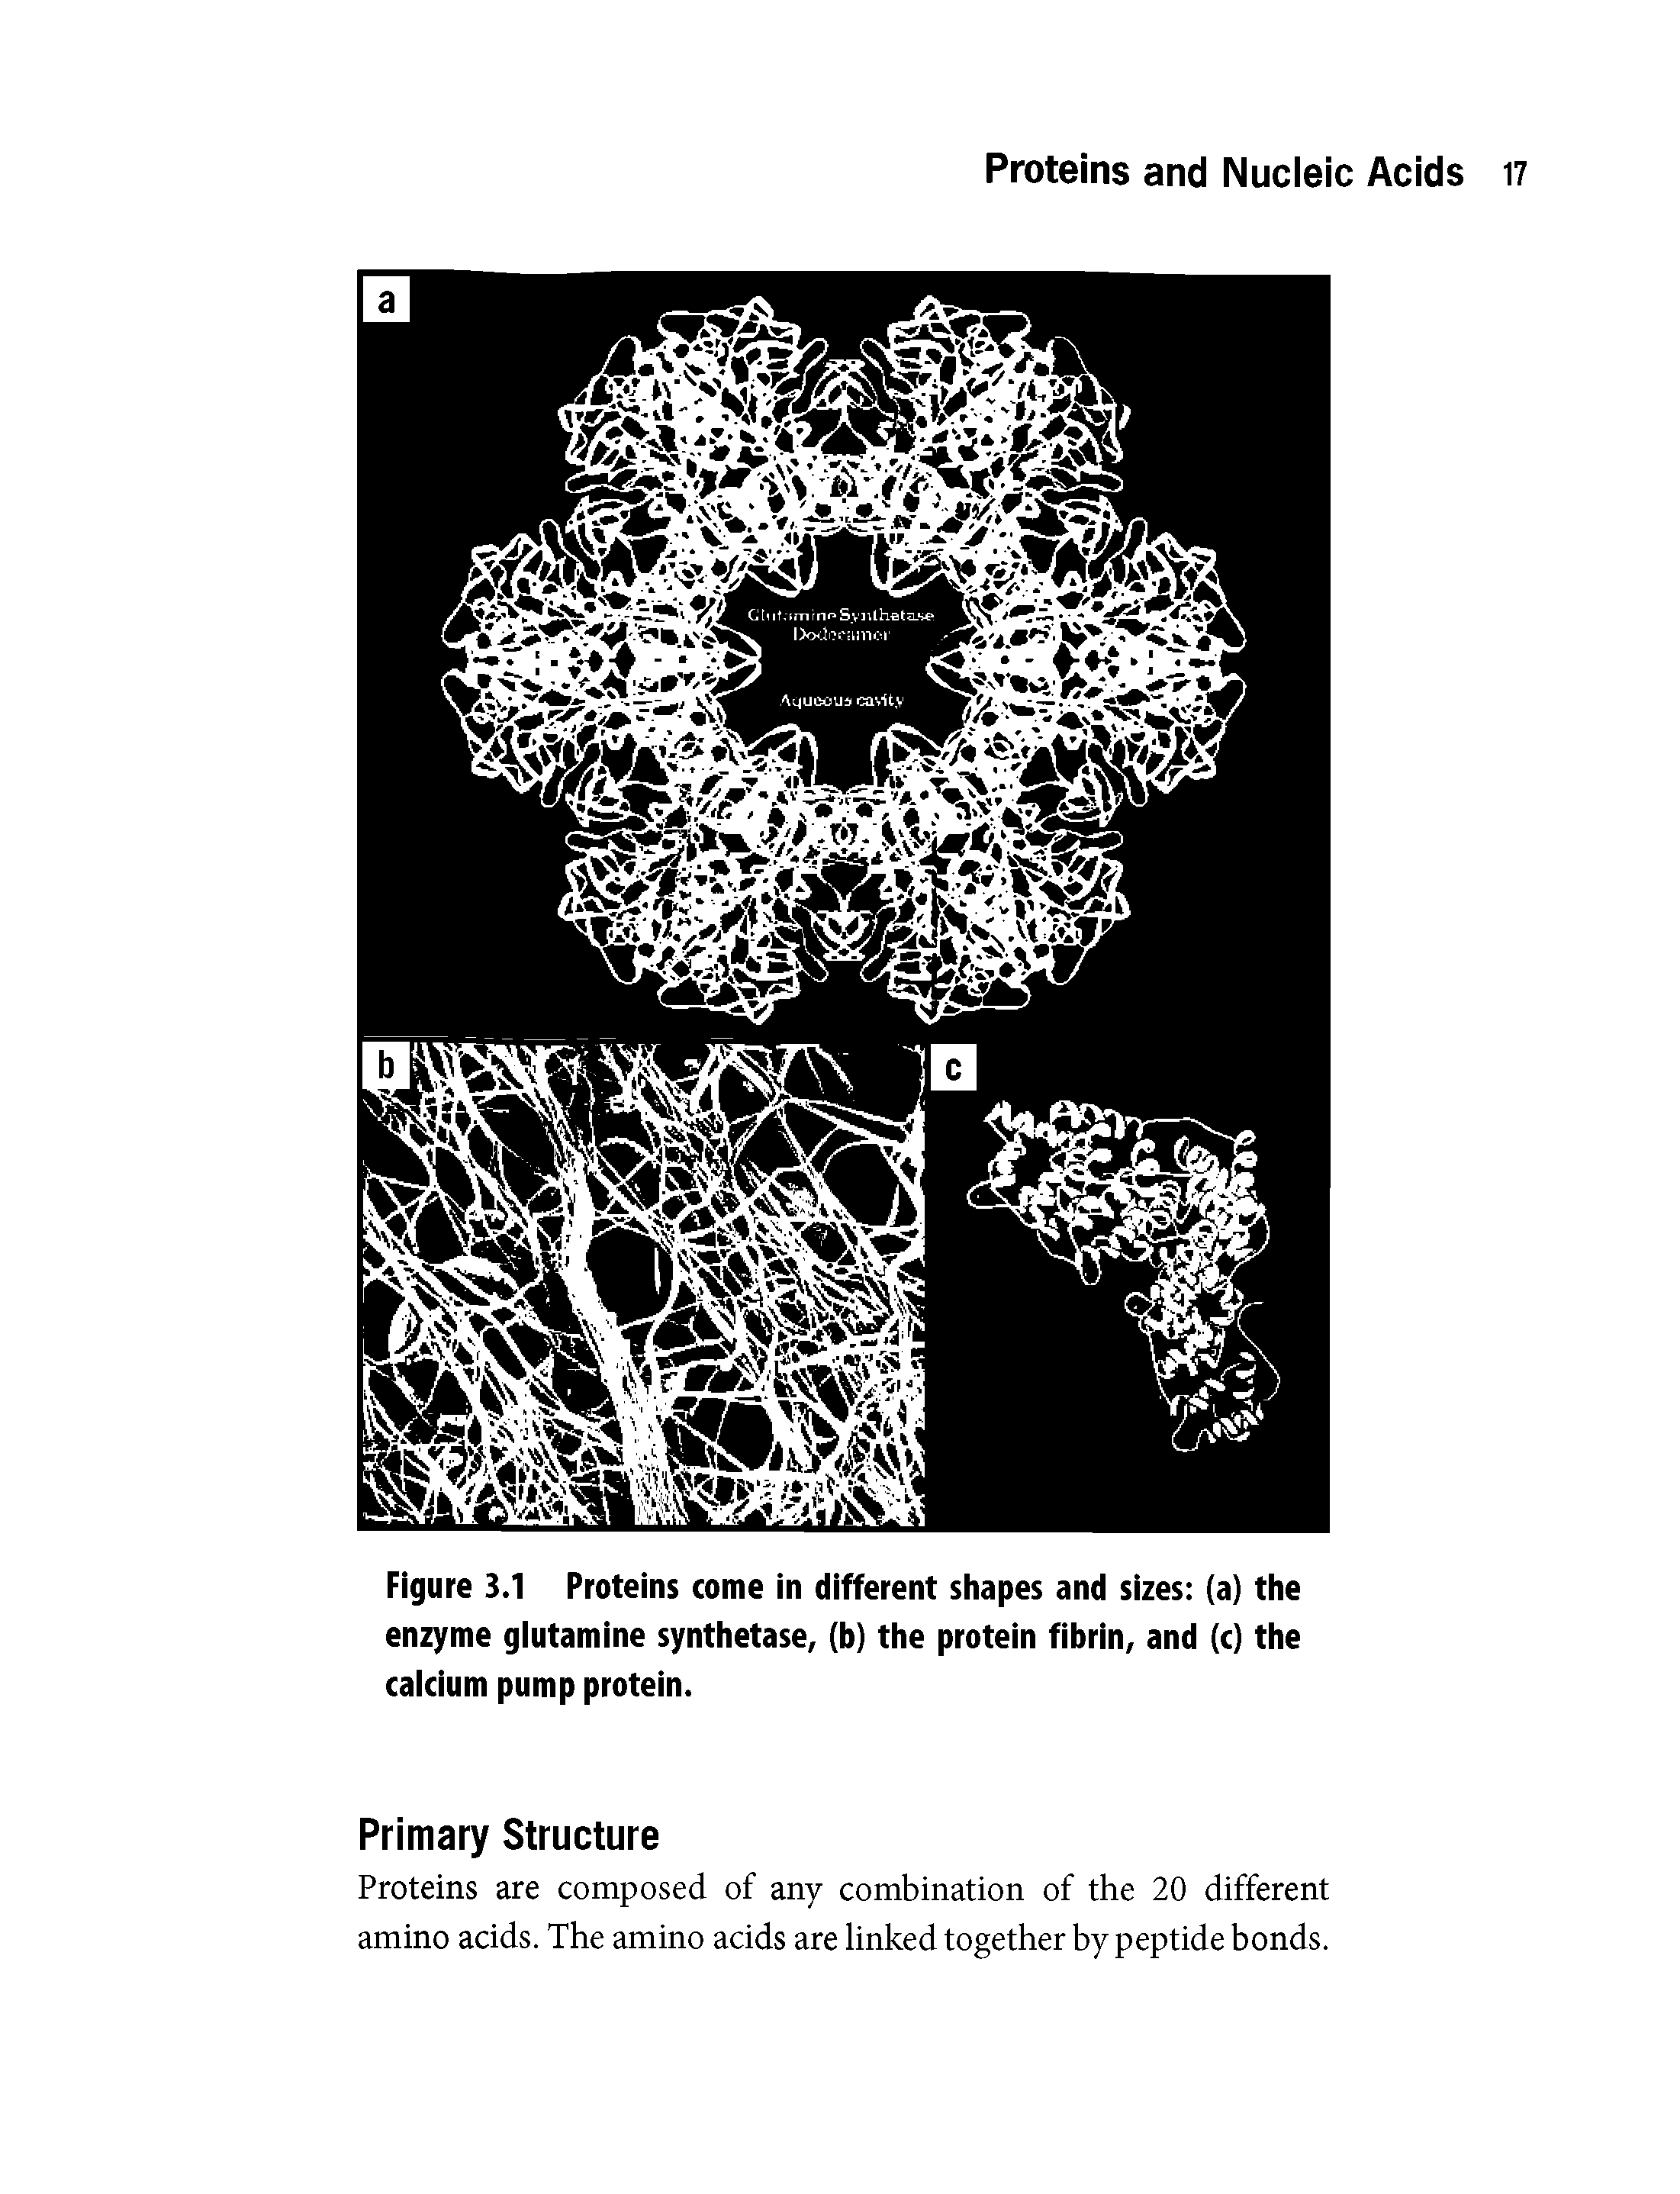 Figure 3.1 Proteins come in different shapes and sizes (a) the enzyme glutamine synthetase, (b) the protein fibrin, and (c) the calcium pump protein.